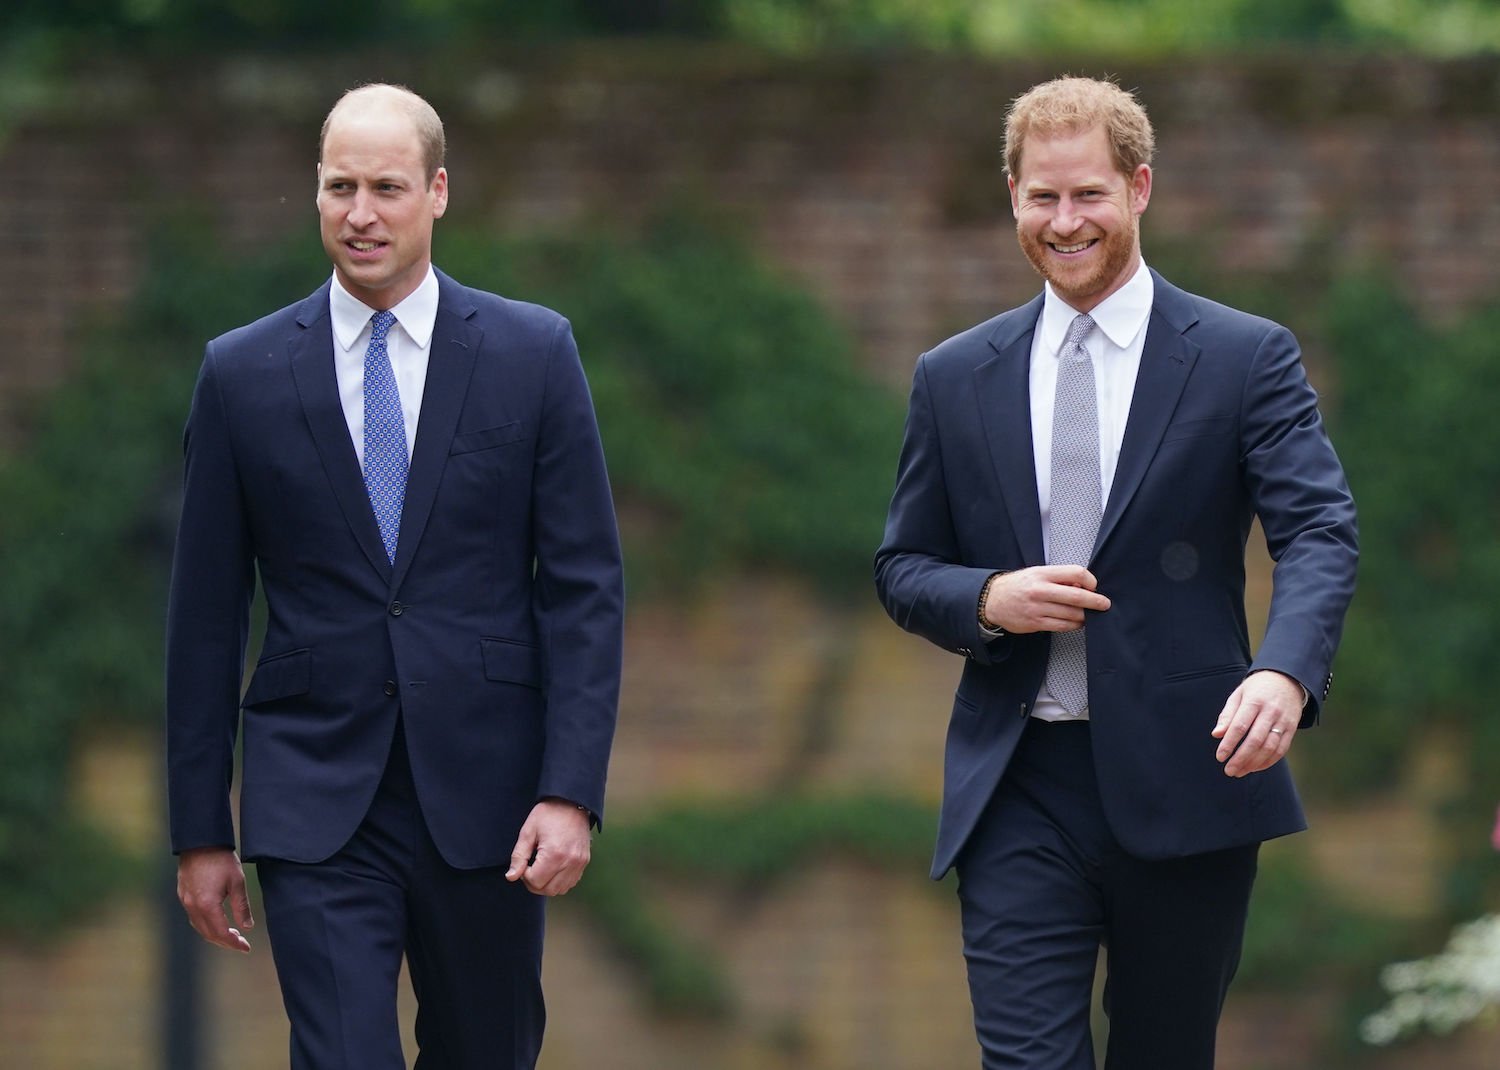 Prince William and Prince Harry wear suits as they walk and talk during their arrival for the unveiling of a Princess Diana statue in the Sunken Garden at Kensington Palace